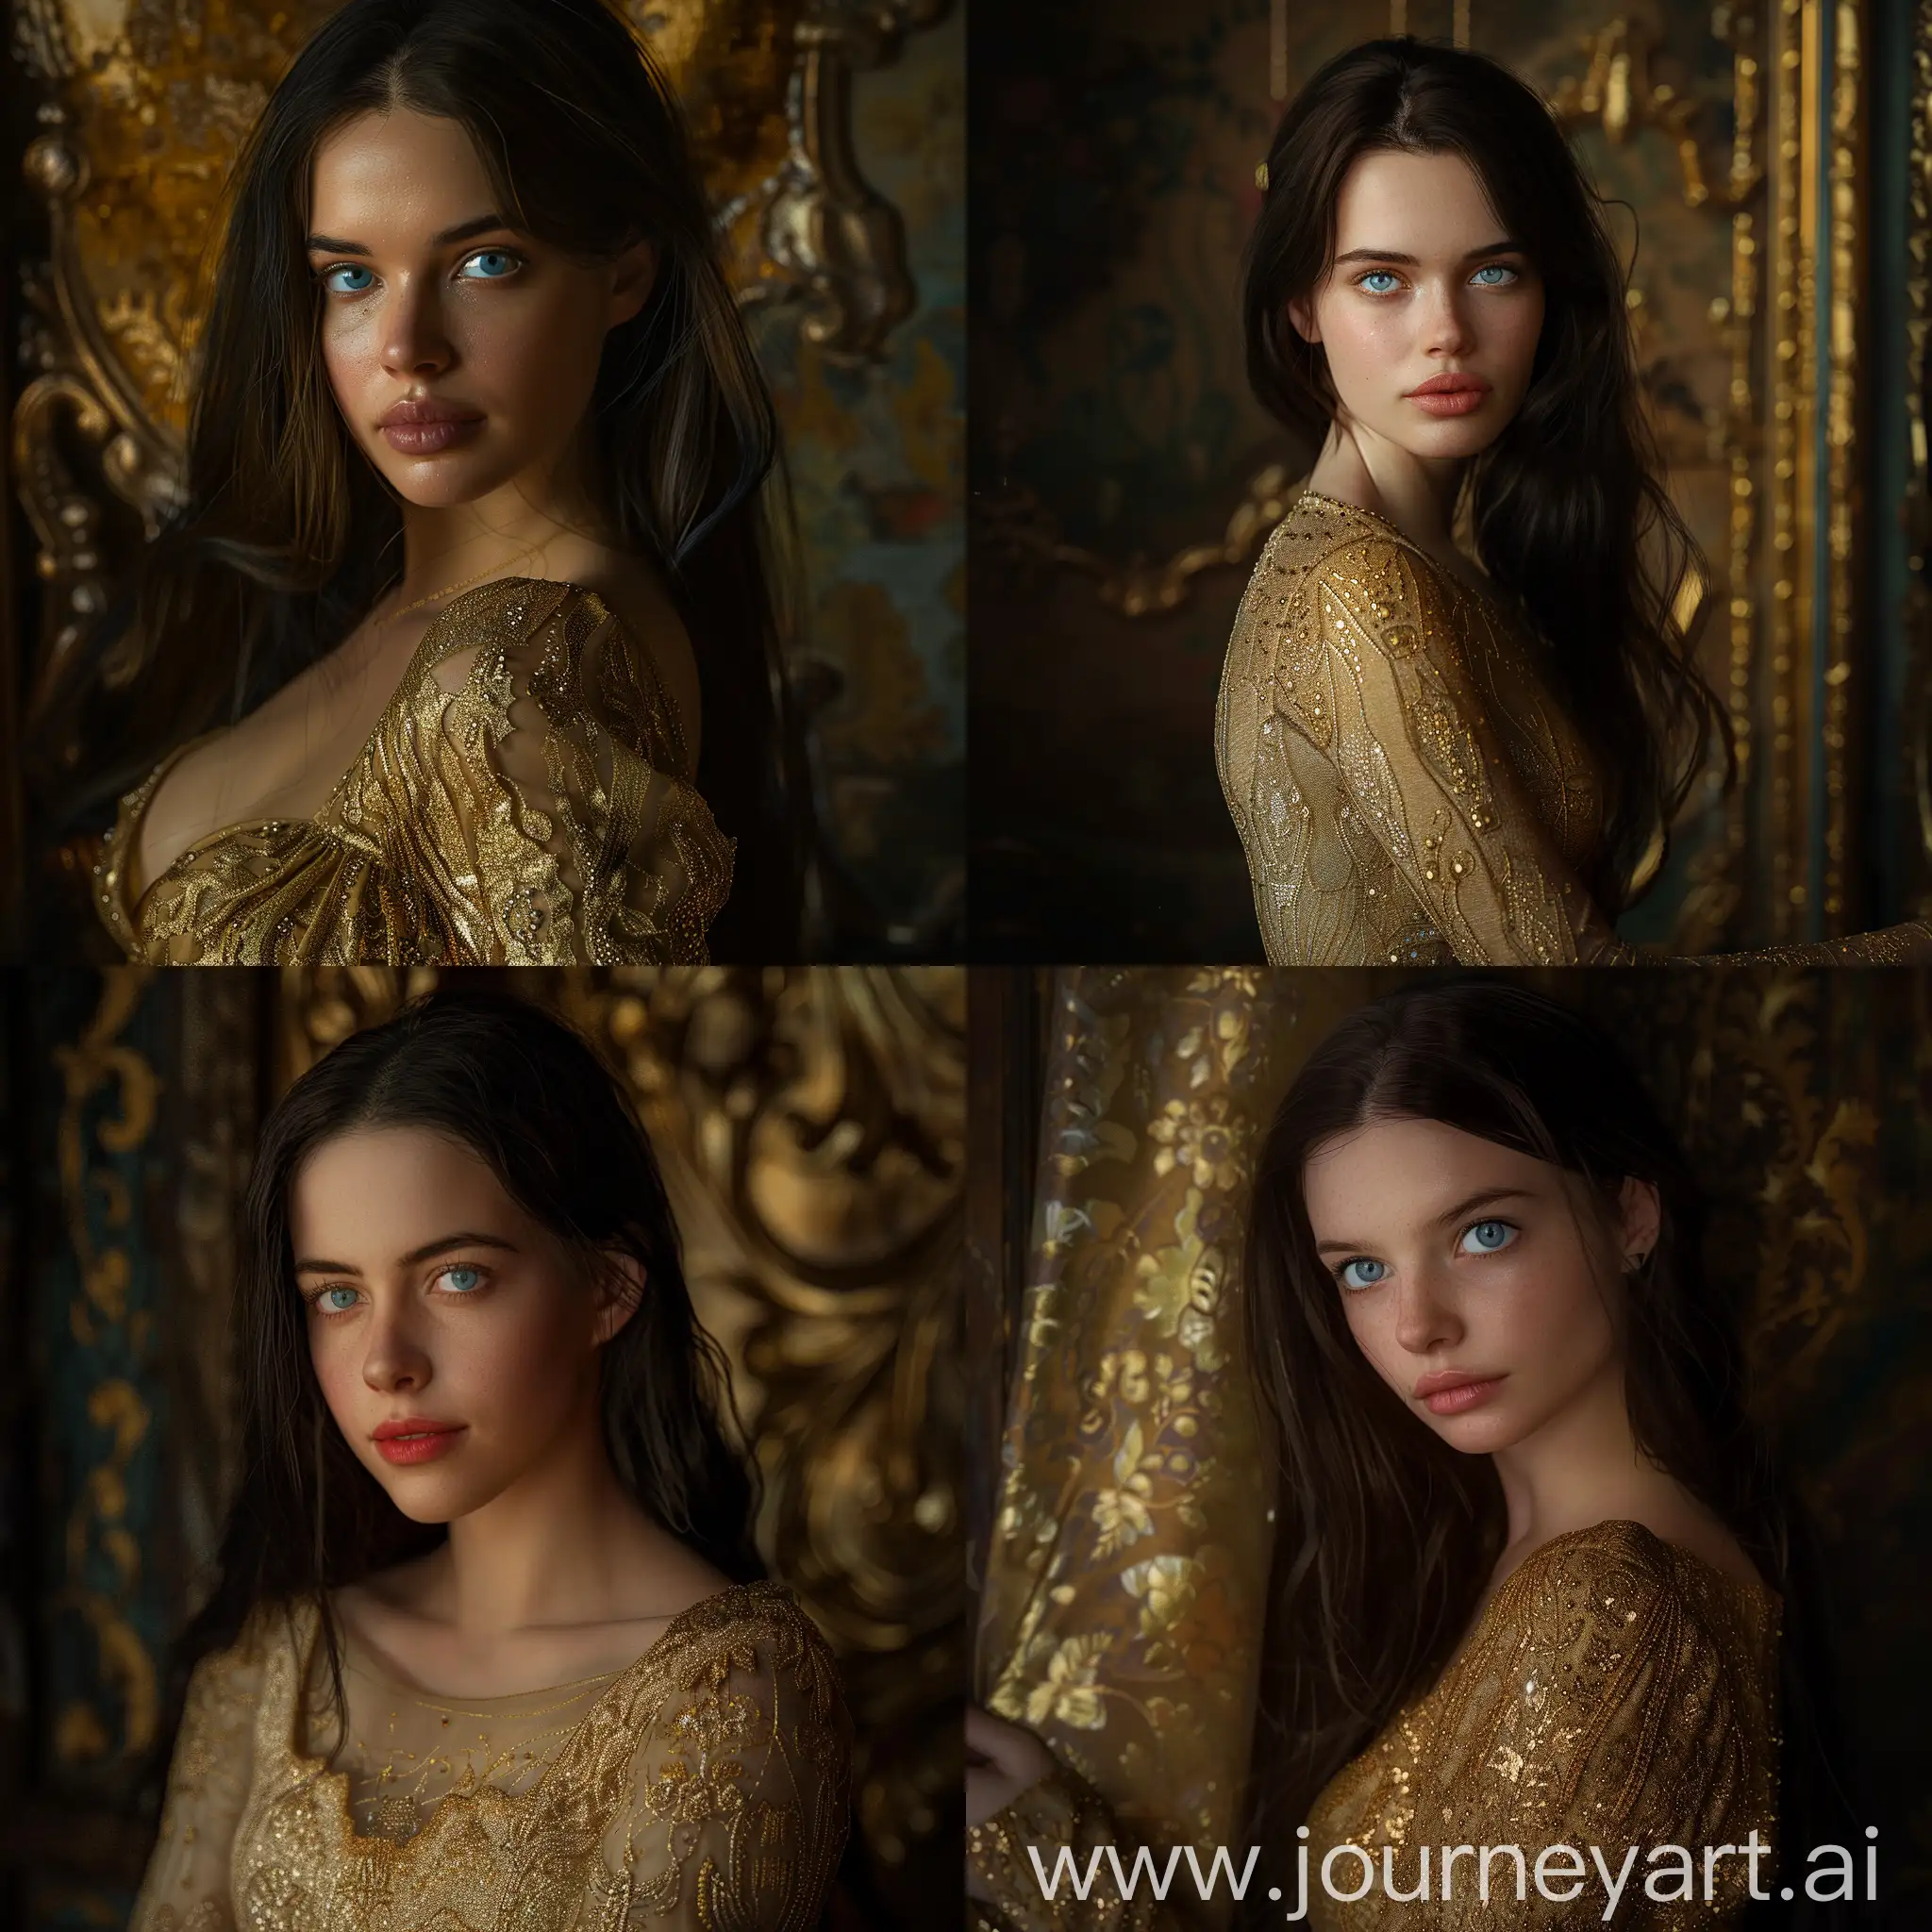 Elegant-Portrait-of-Young-Woman-in-Gold-Dress-with-Serious-Expression